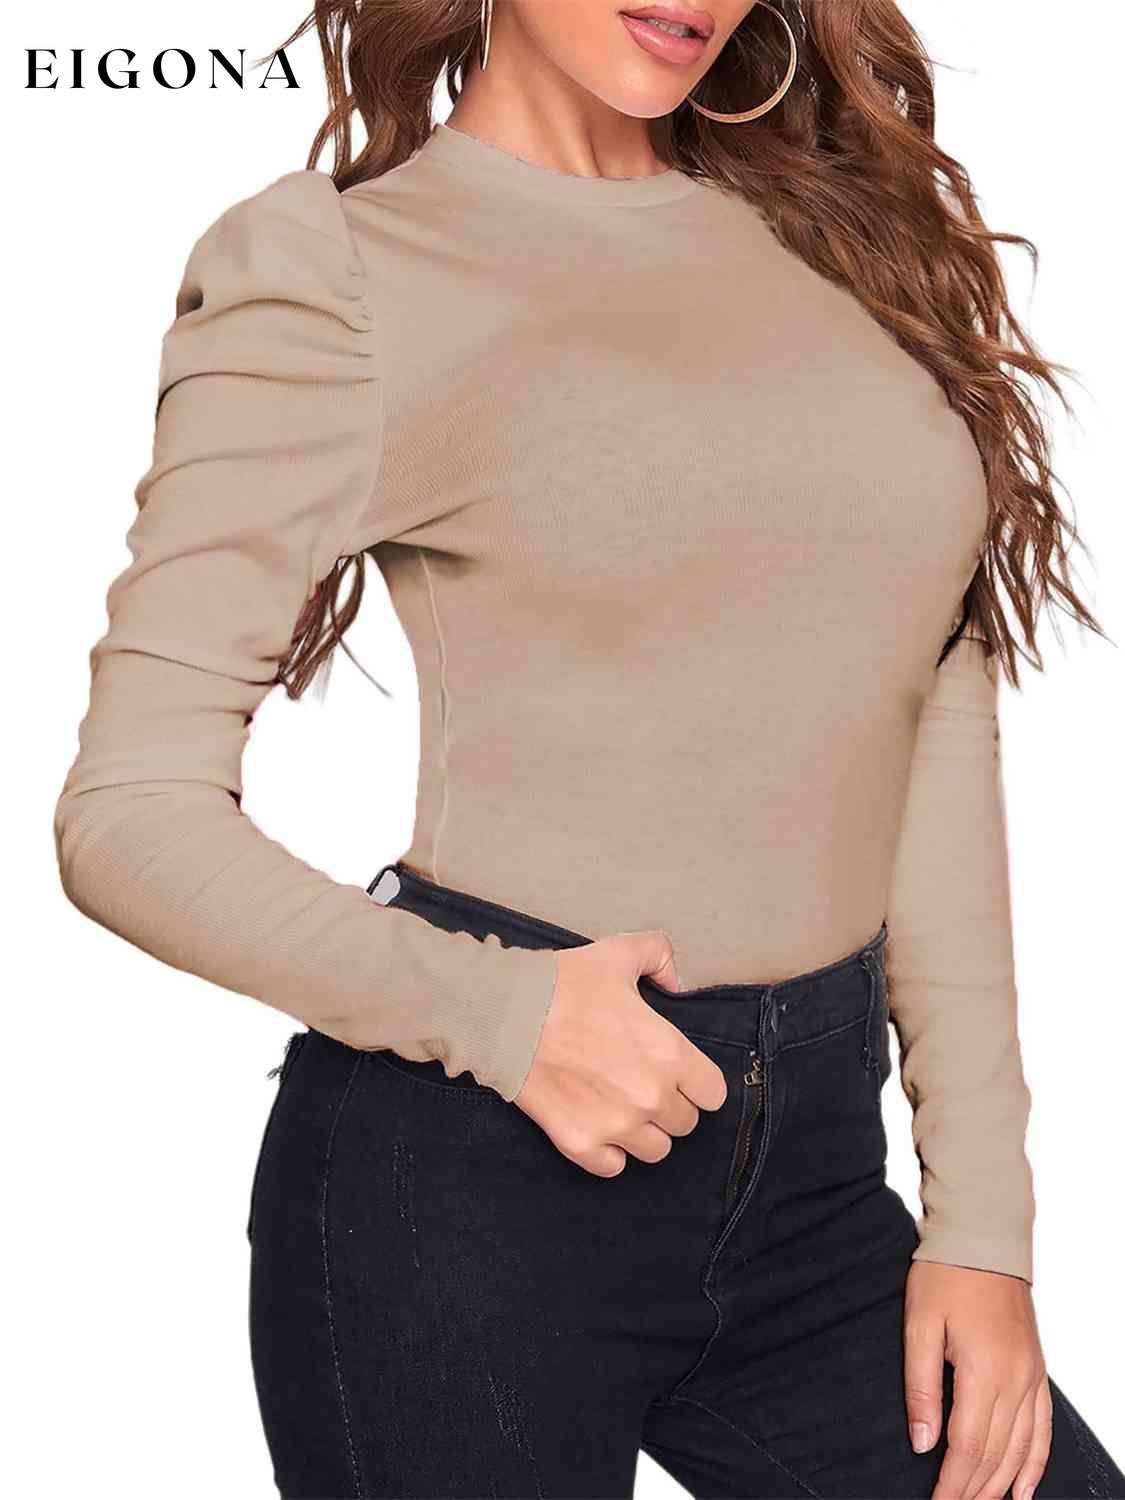 Round Neck Leg-Of-Mutton Sleeve Top A.L.D. clothes long sleeve shirt long sleeve shirts long sleeve top long sleeve tops Ship From Overseas shirt shirts top tops